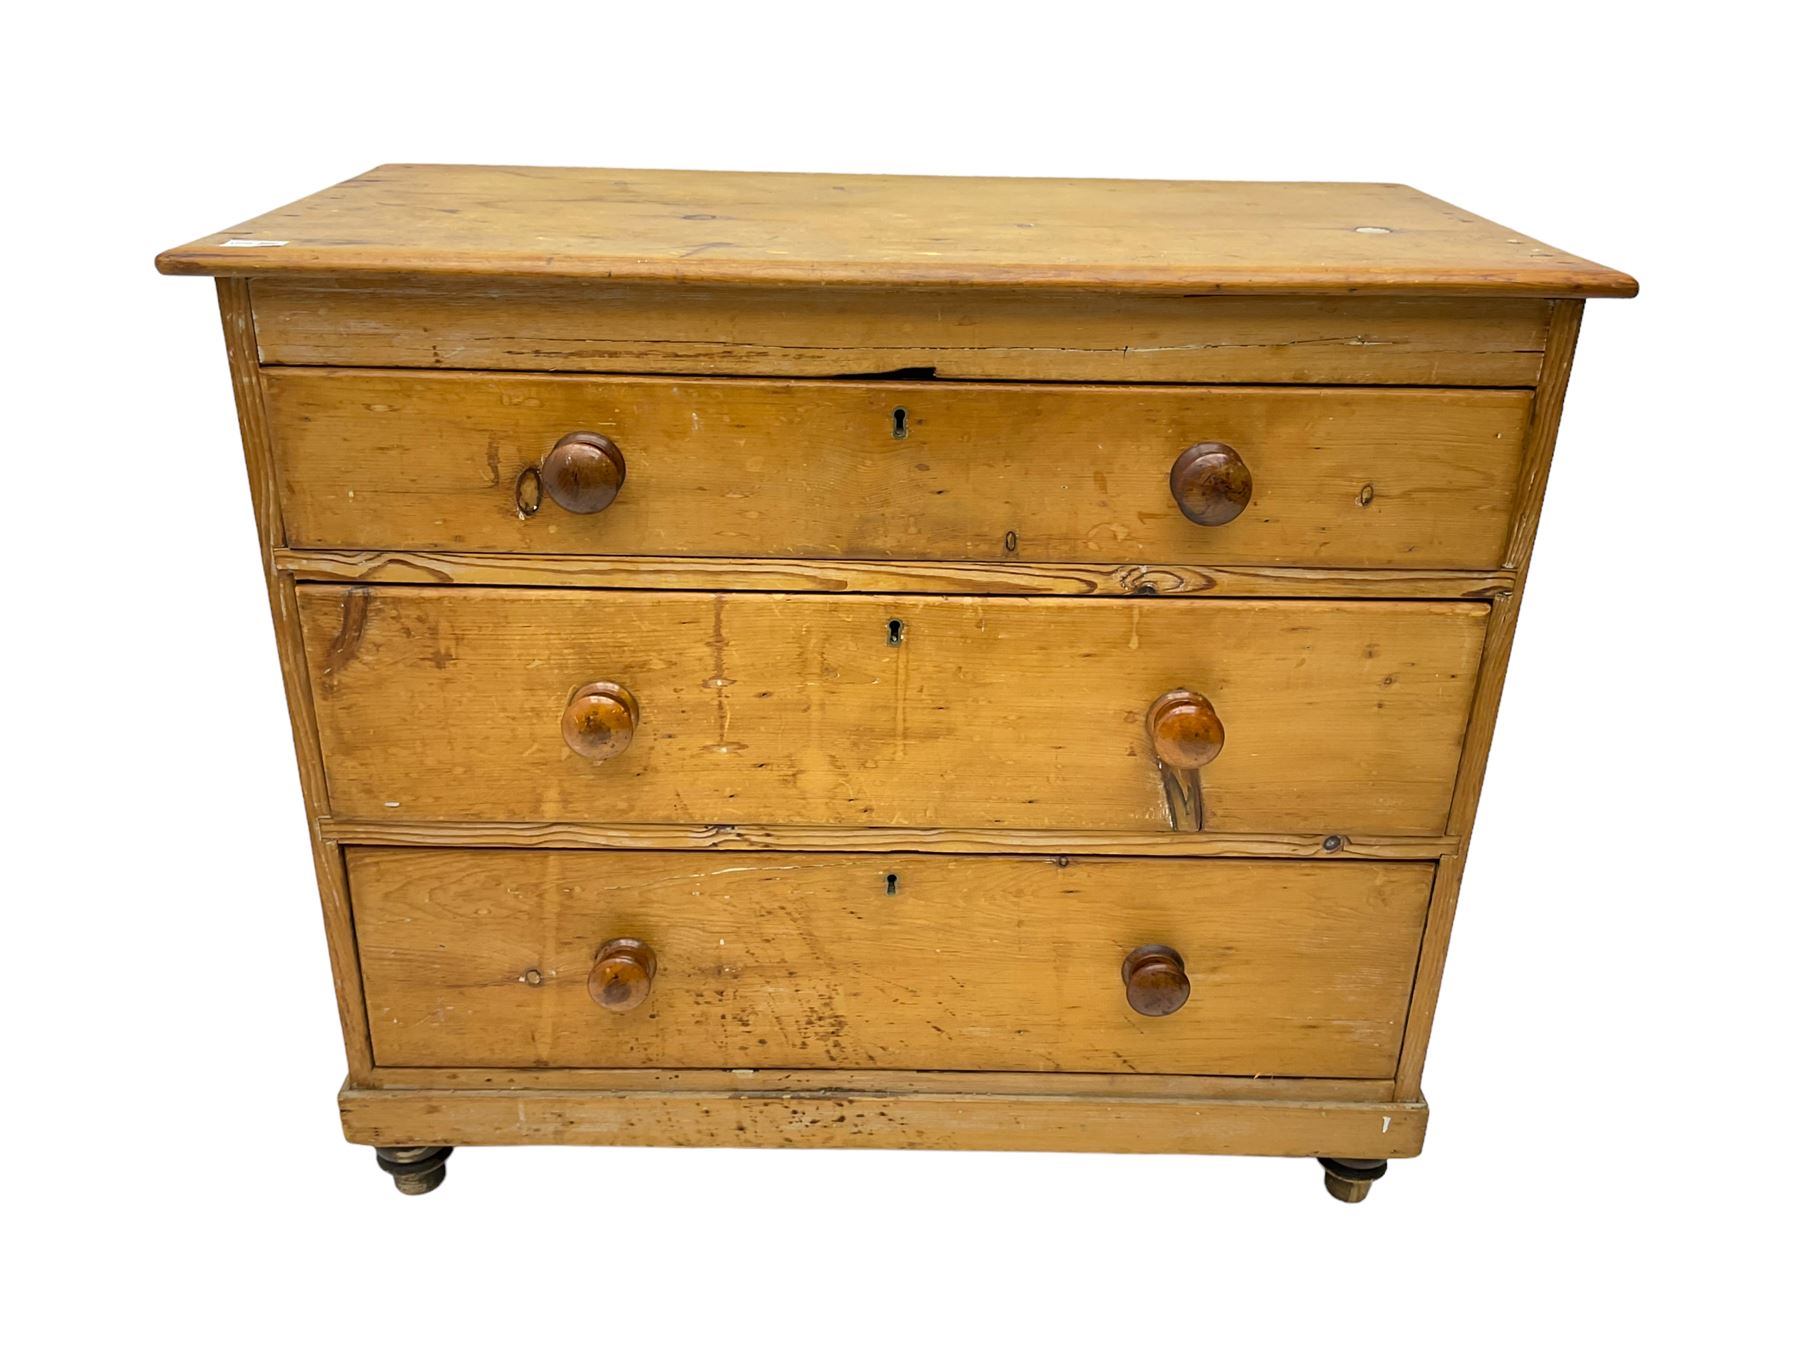 Victorian waxed pine chest - Image 7 of 7